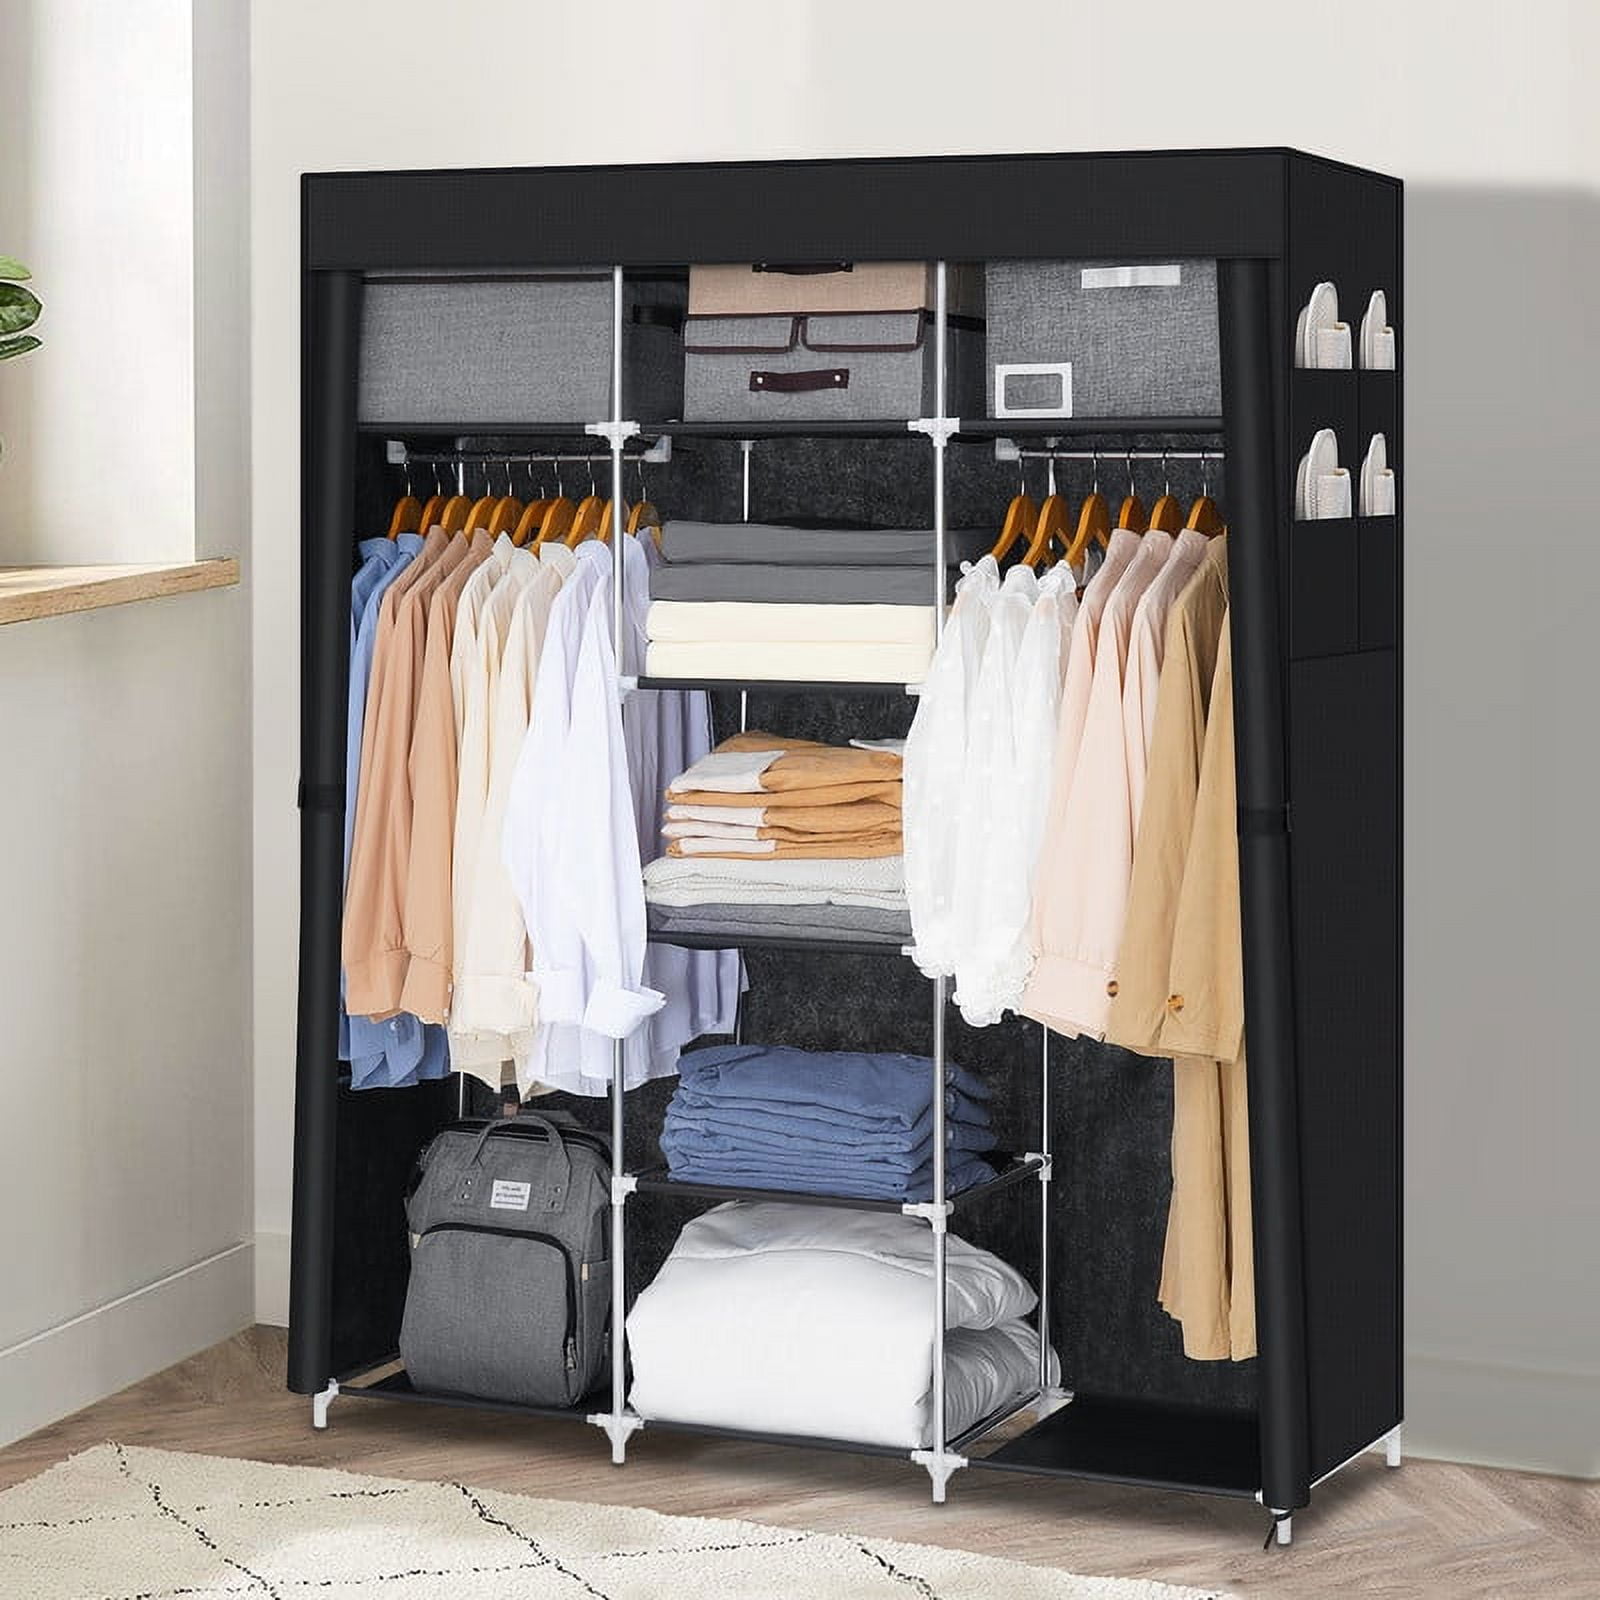 Portable Closet with 5 Shelf Closet Storage with 2 Hanging Rods, 58 inch X14 inch X68 inch Closet Organizer Clothes Organizer with Cover Wardrobe for